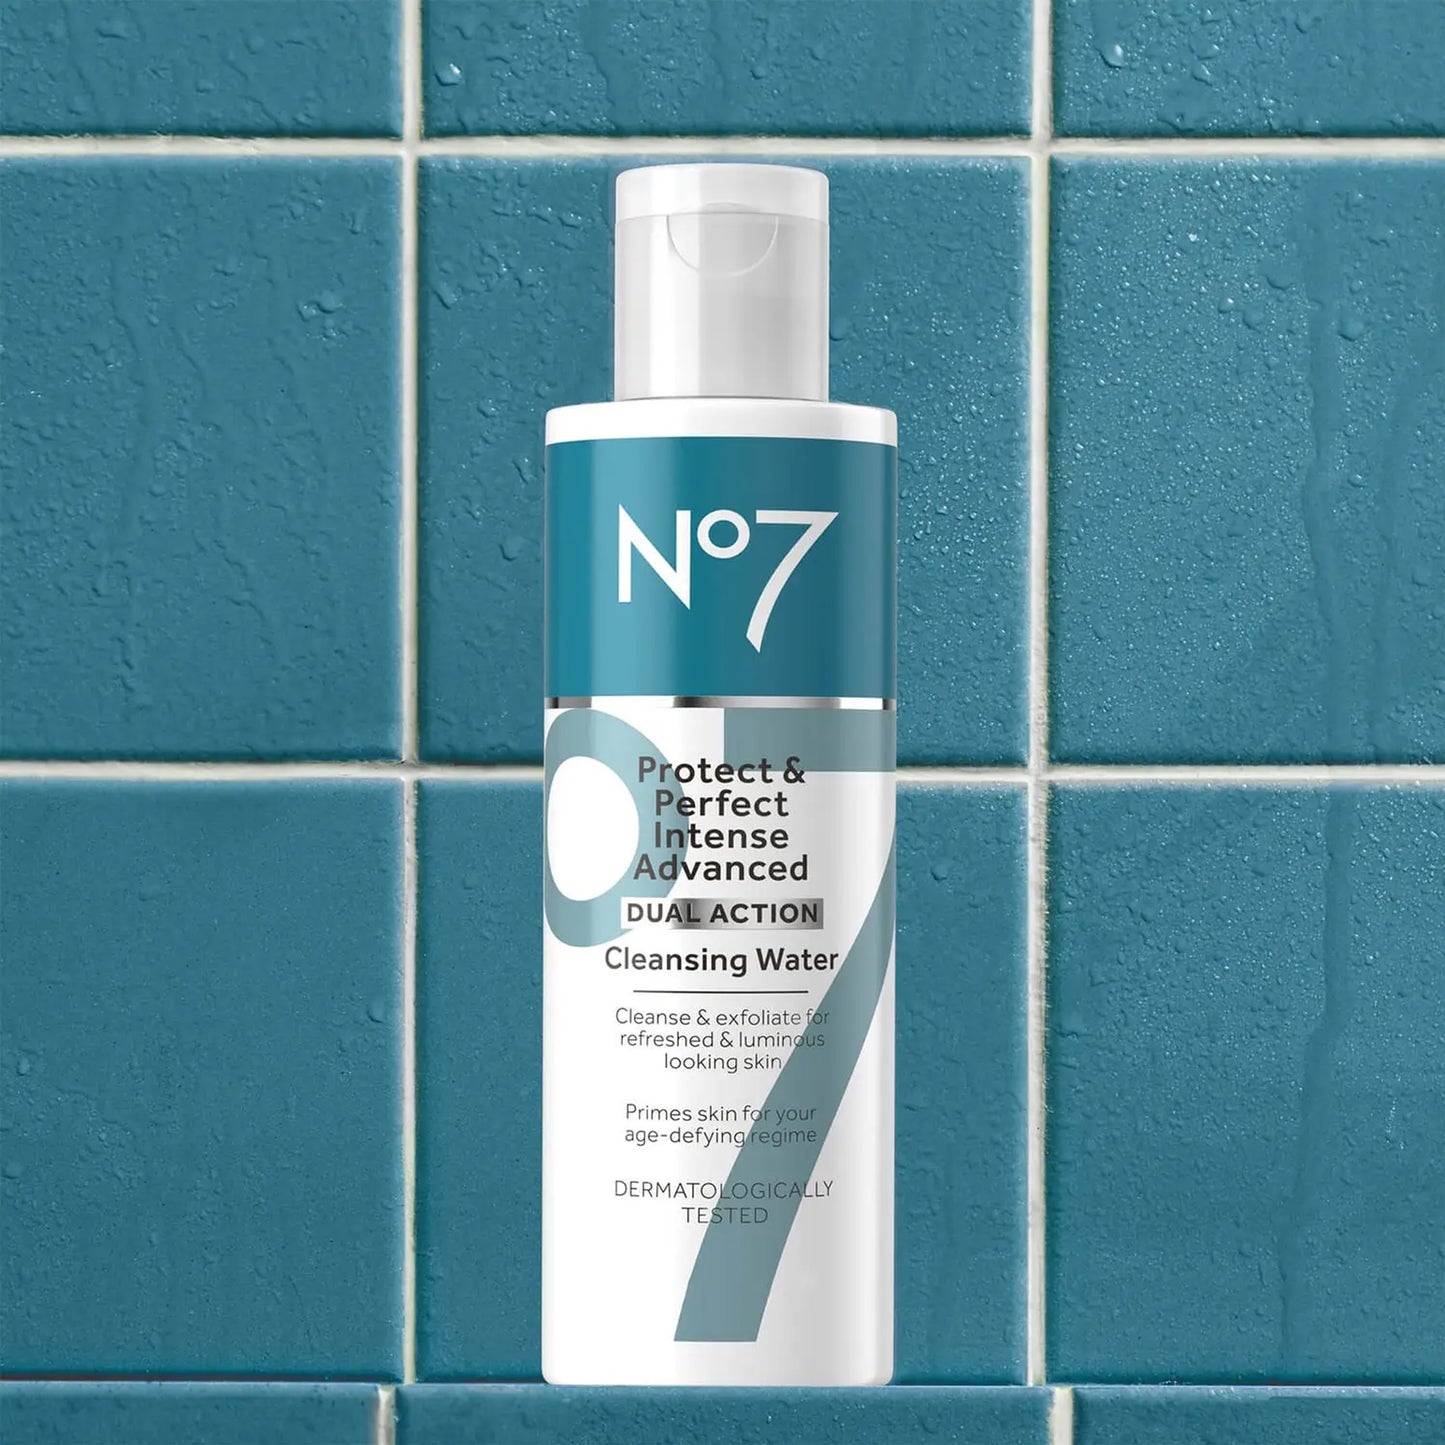 No7 Protect Perfect Intense Advanced Dual Action Cleansing Water 200 mL